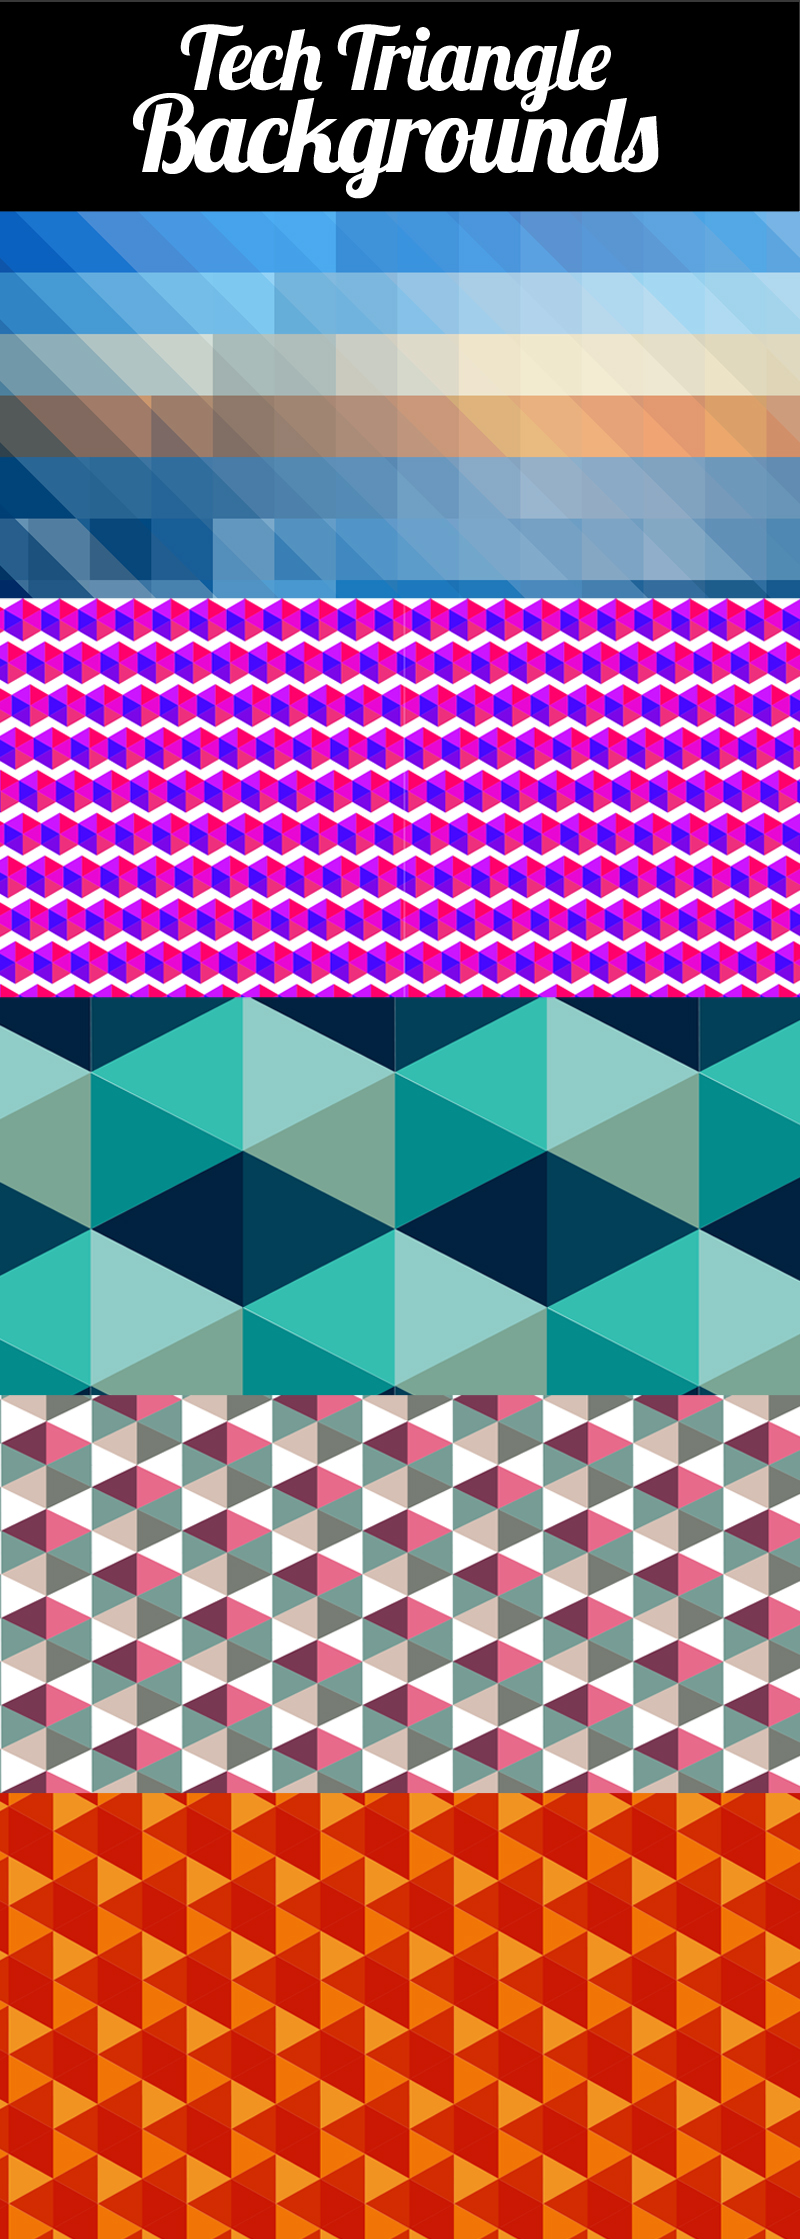 Tech Triangles Backgrounds